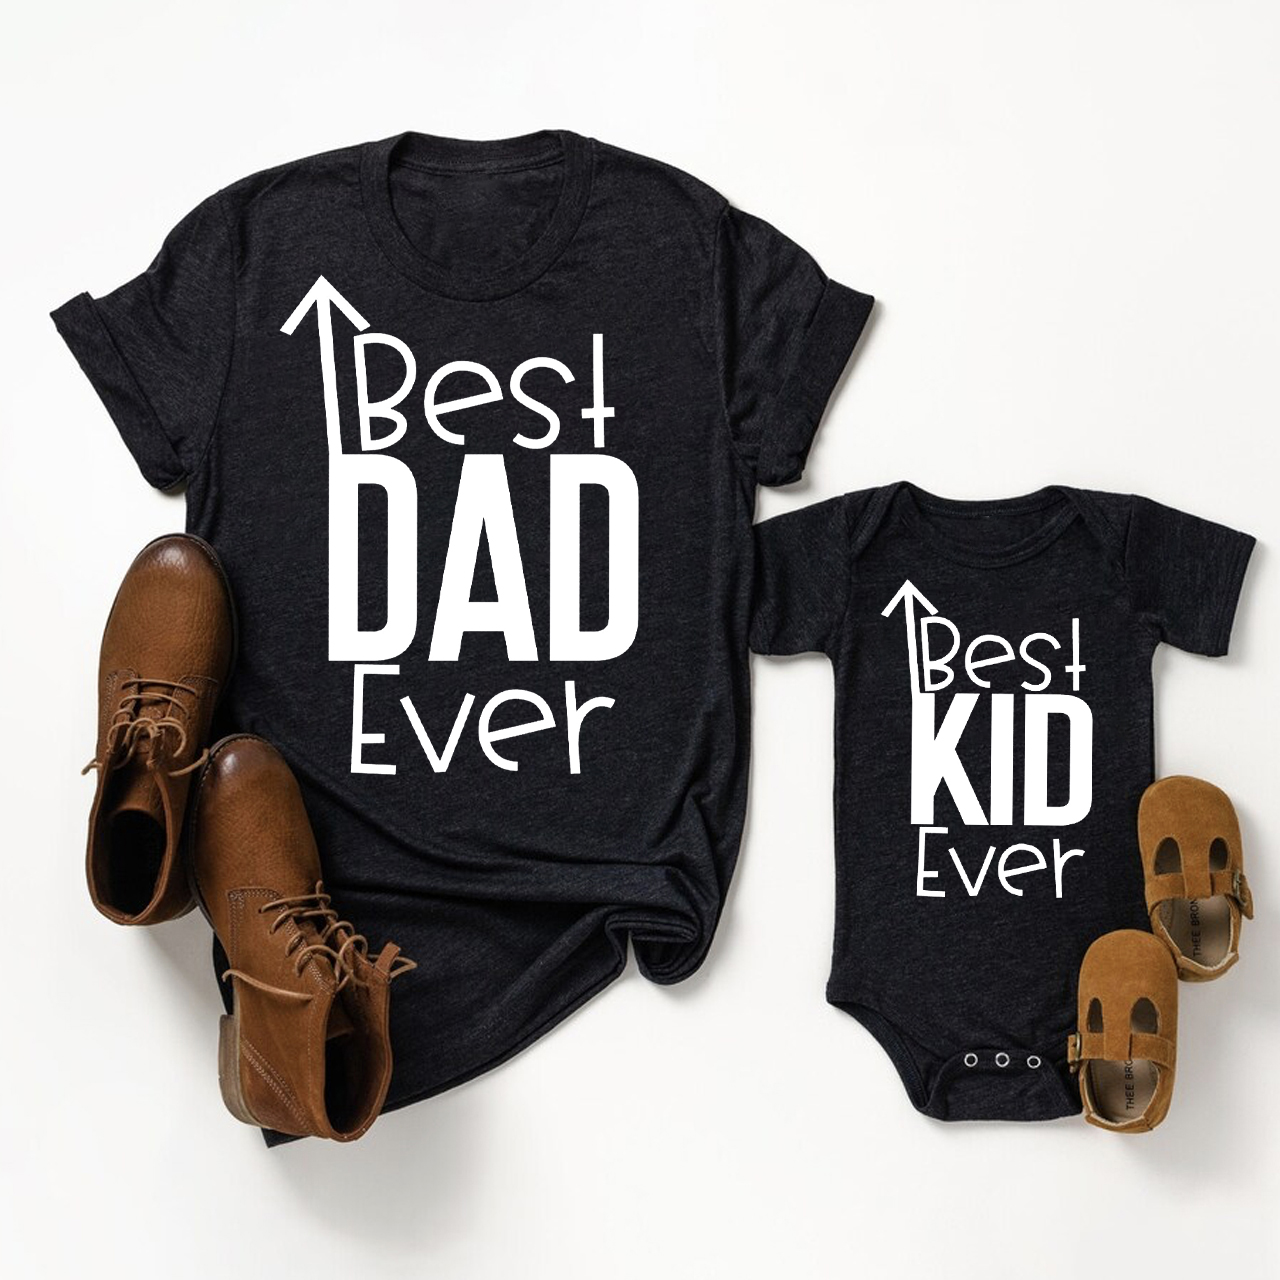 Best Dad & Kid Ever Matching Tees For Dad & Me